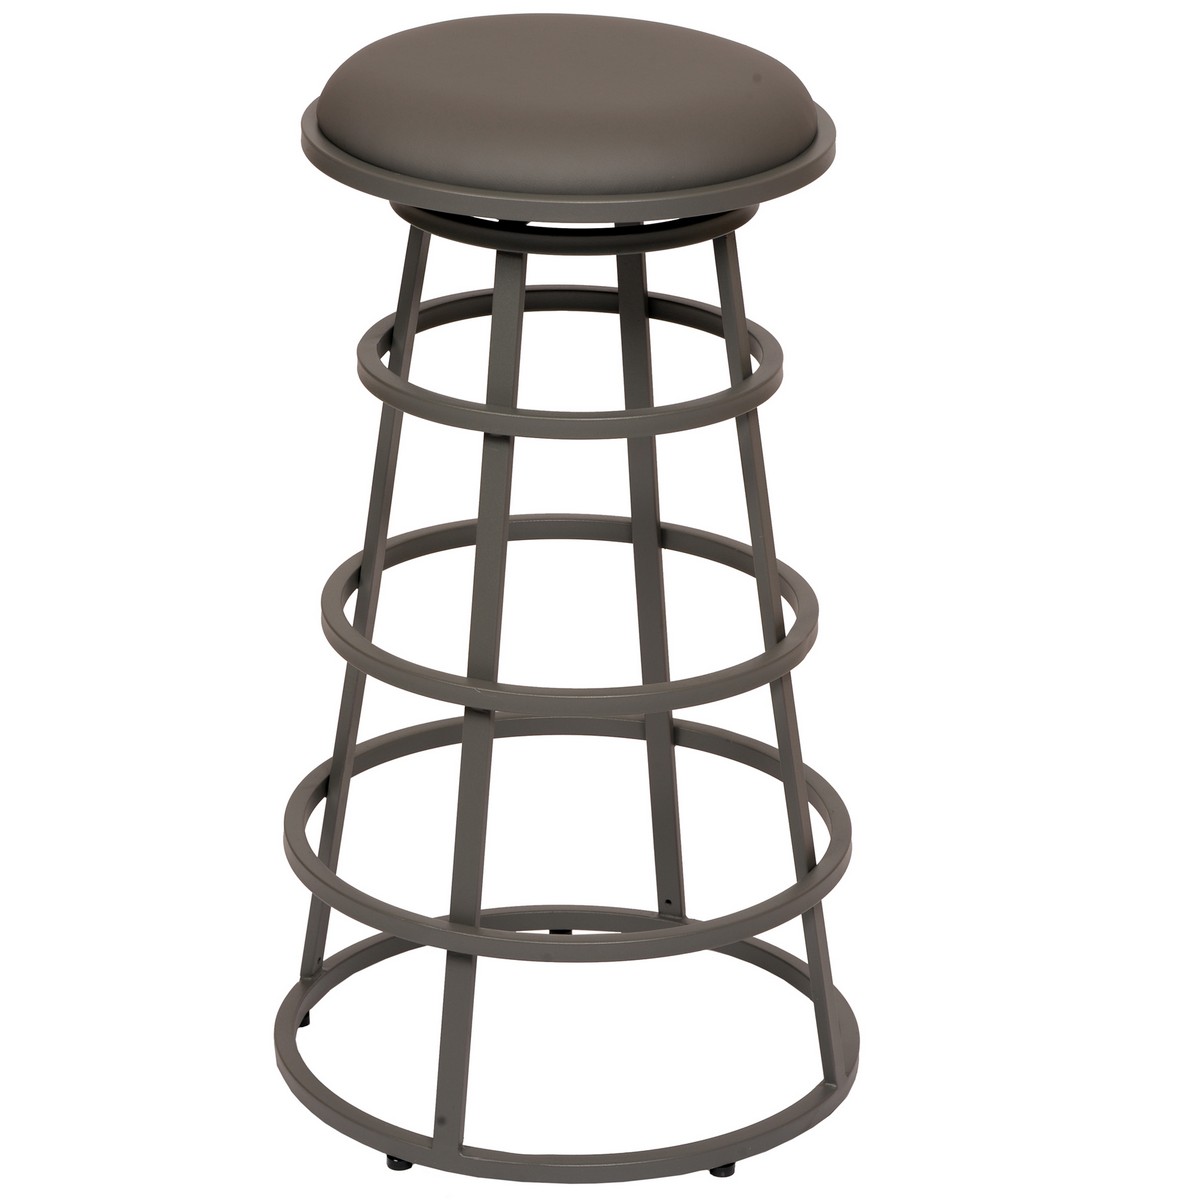 Armen Living Ringo 30-inch Backless Gray Metal Barstool in Gray Leatherette